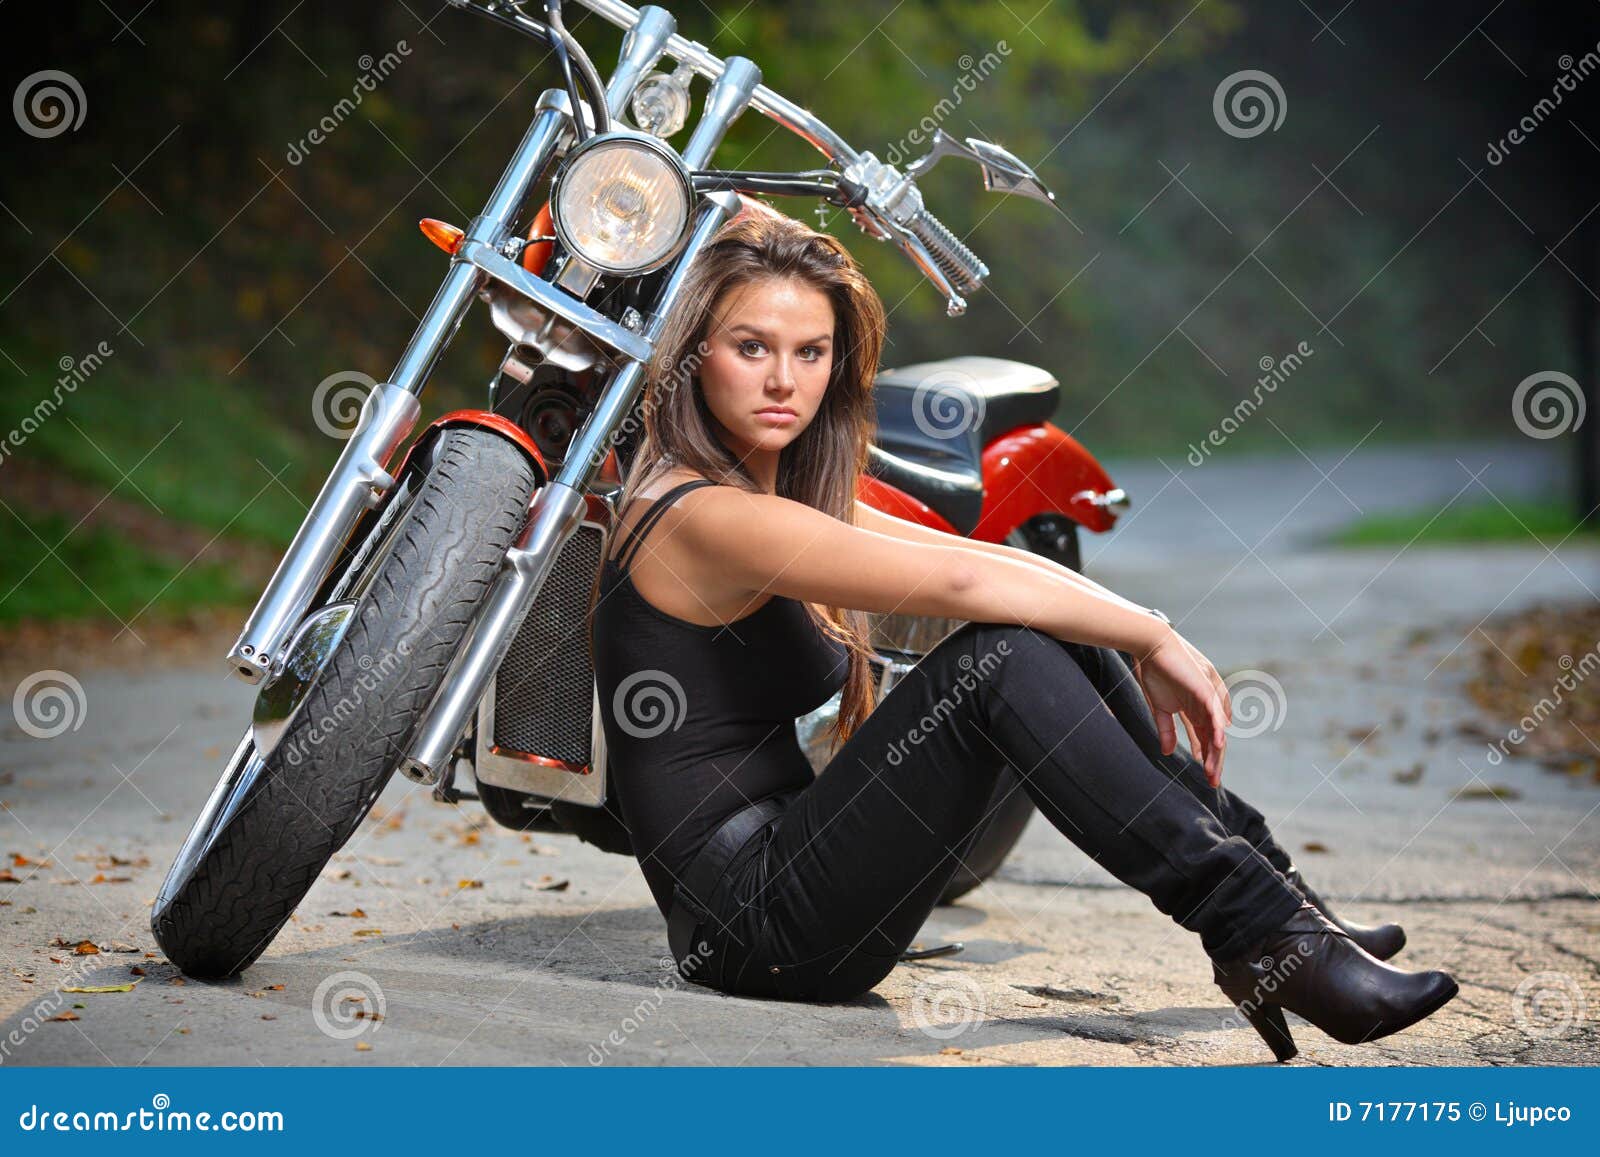 catherine kowald share pictures of biker woman photos